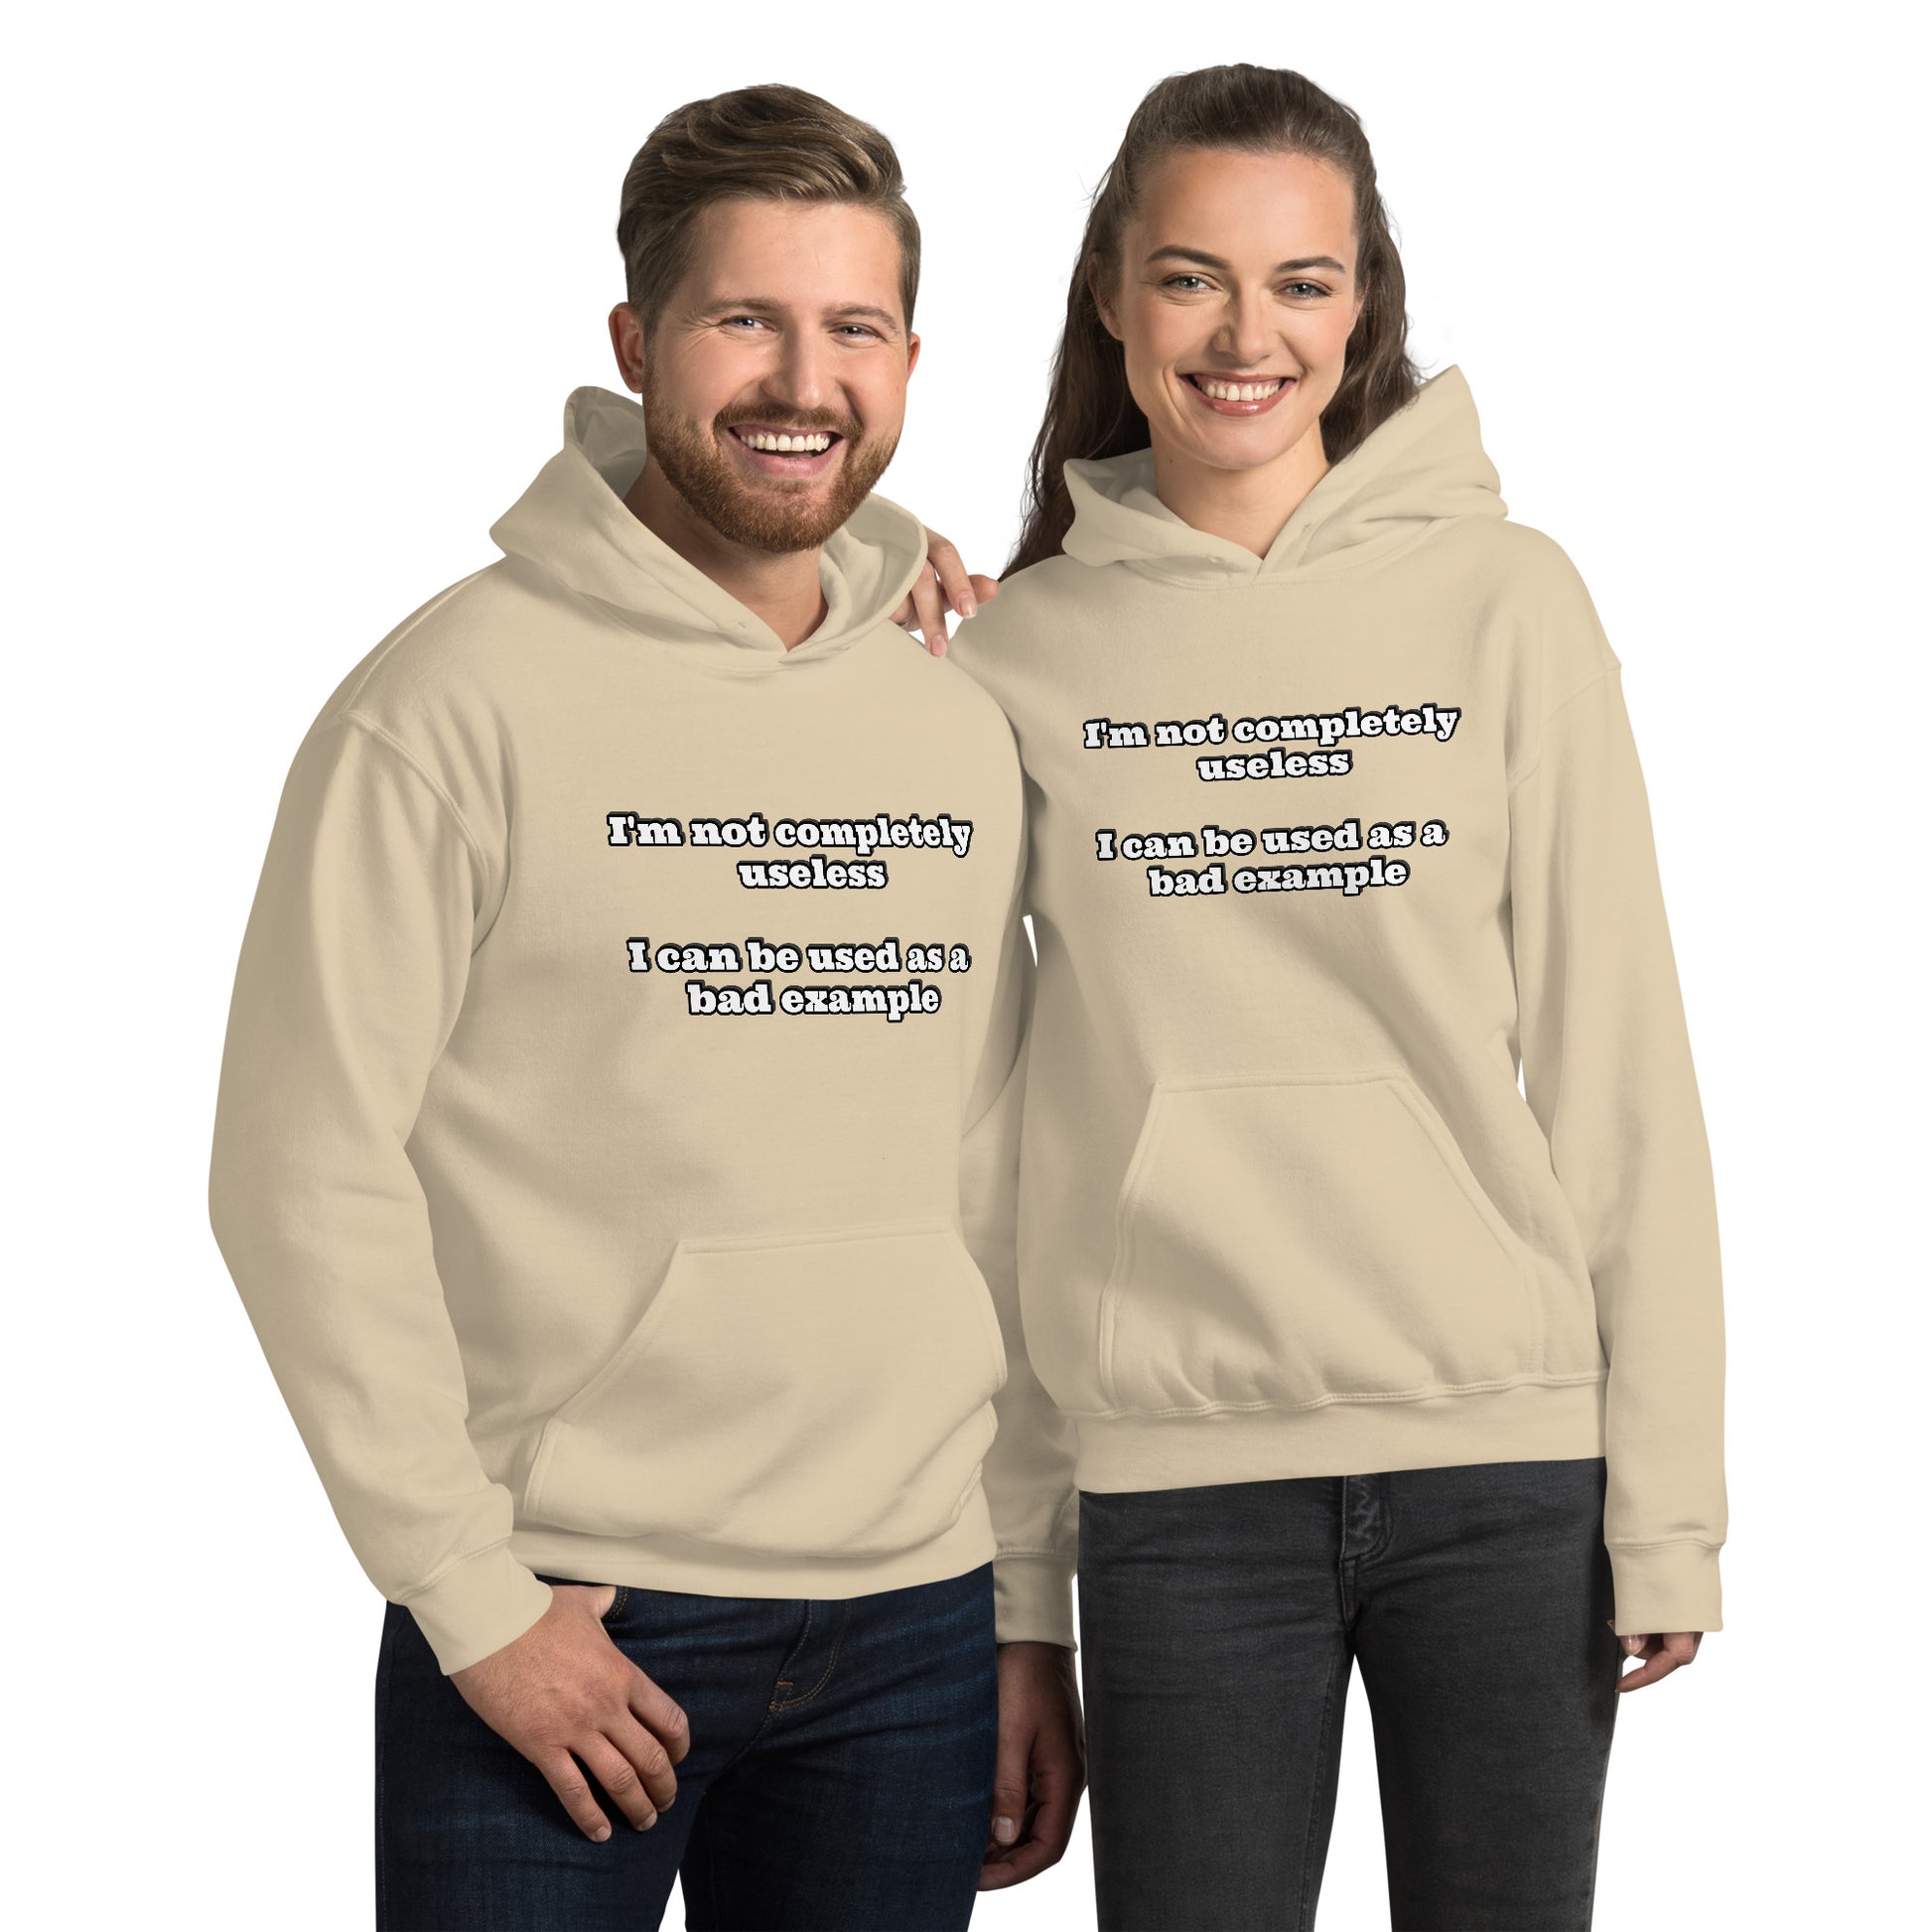 Man and women with sand hoodie with text “I'm not completely useless I can be used as a bad example”